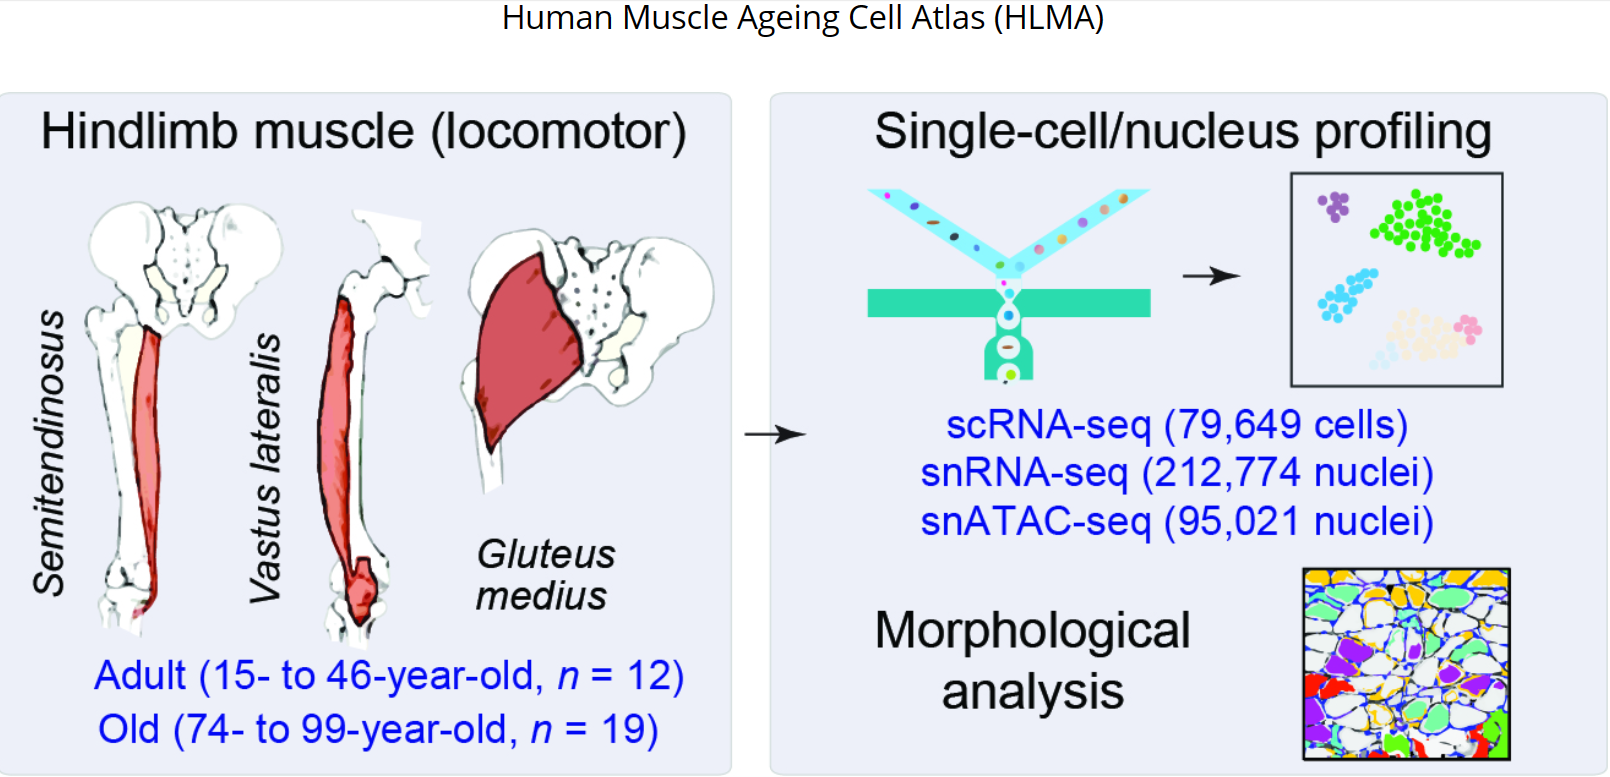 Human Muscle Ageing Cell Atlas (HLMA)